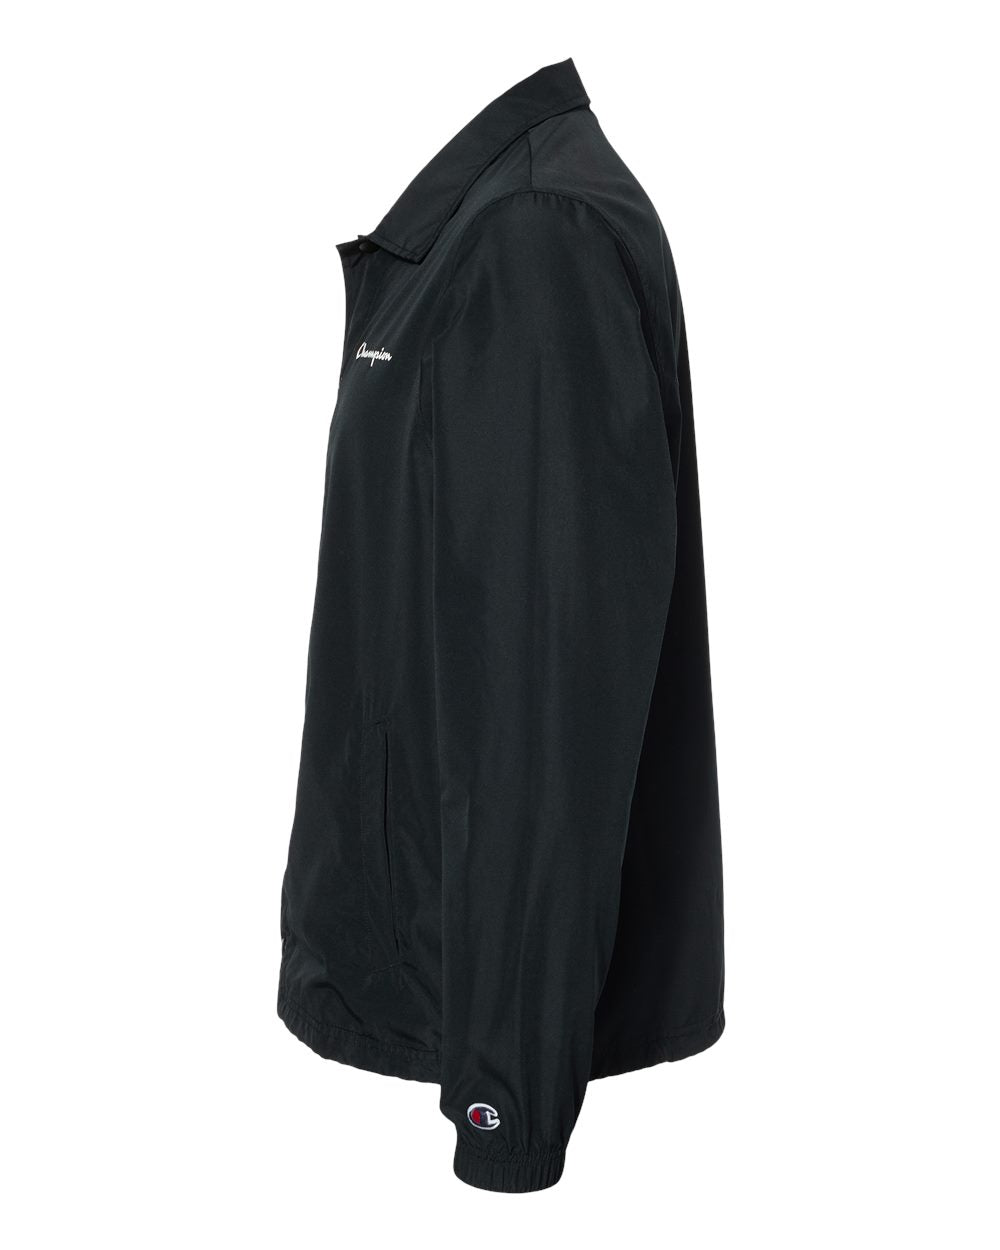 fully customizable polyester champion coach jacket for your brand